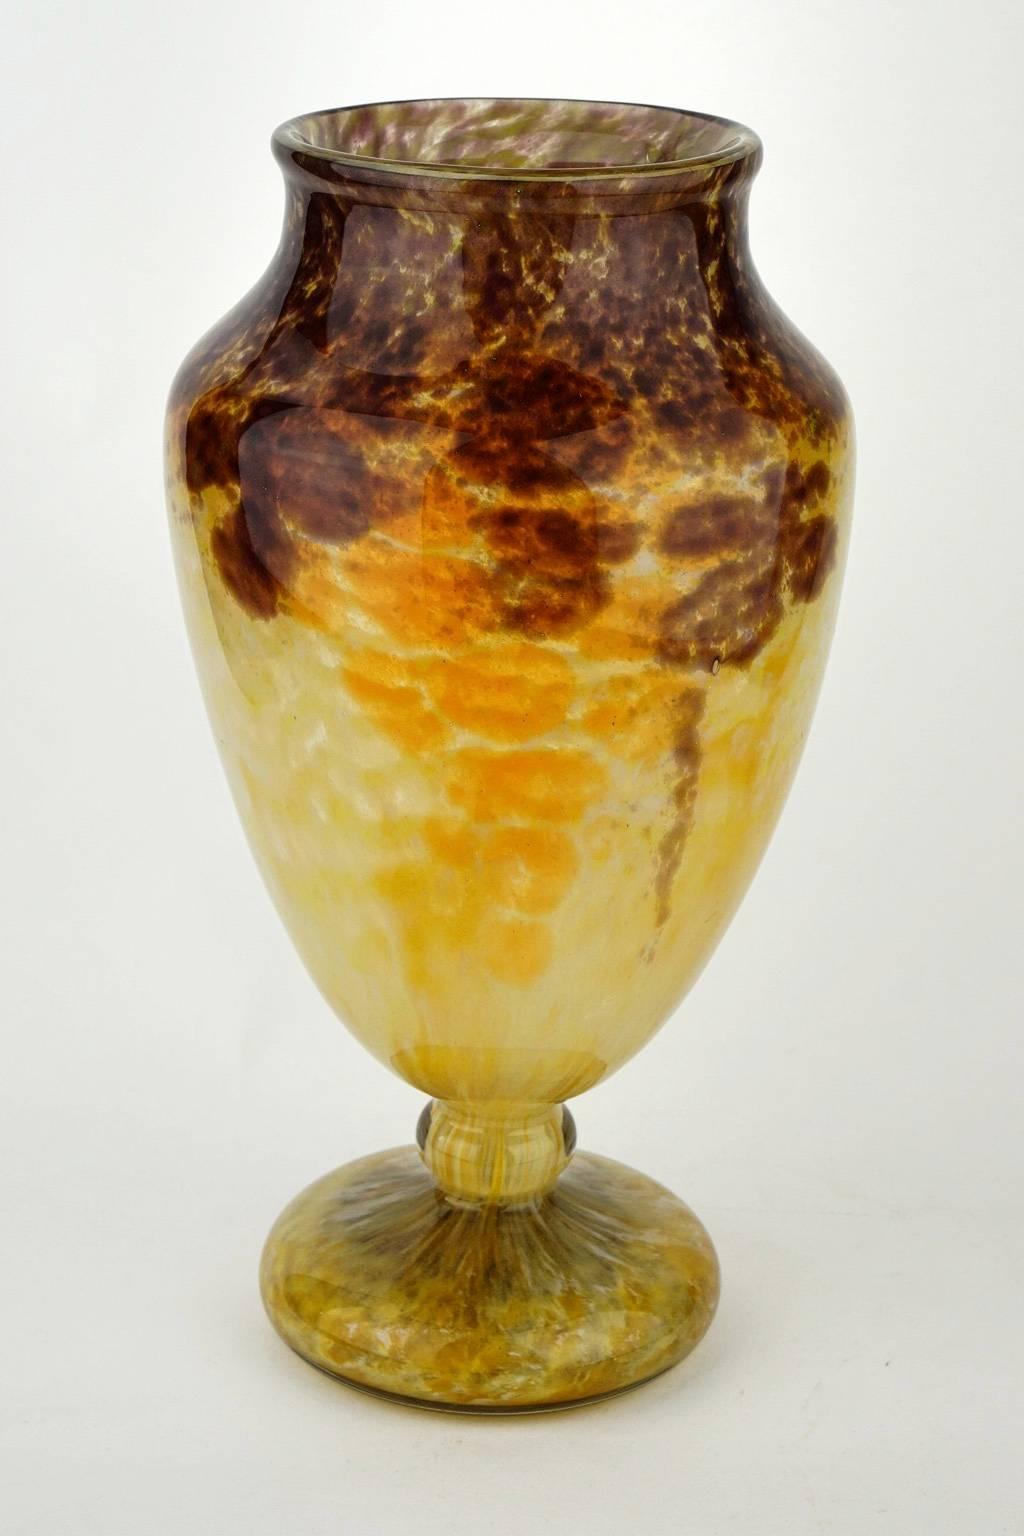 Large French Art Deco Jade vase in brown, yellow and cloudy white hues with stylized patterns of bunches of grapes by Charles Schneider. Very good condition.

The Jade series played a major role in Charles Schneider's Art Deco production. From